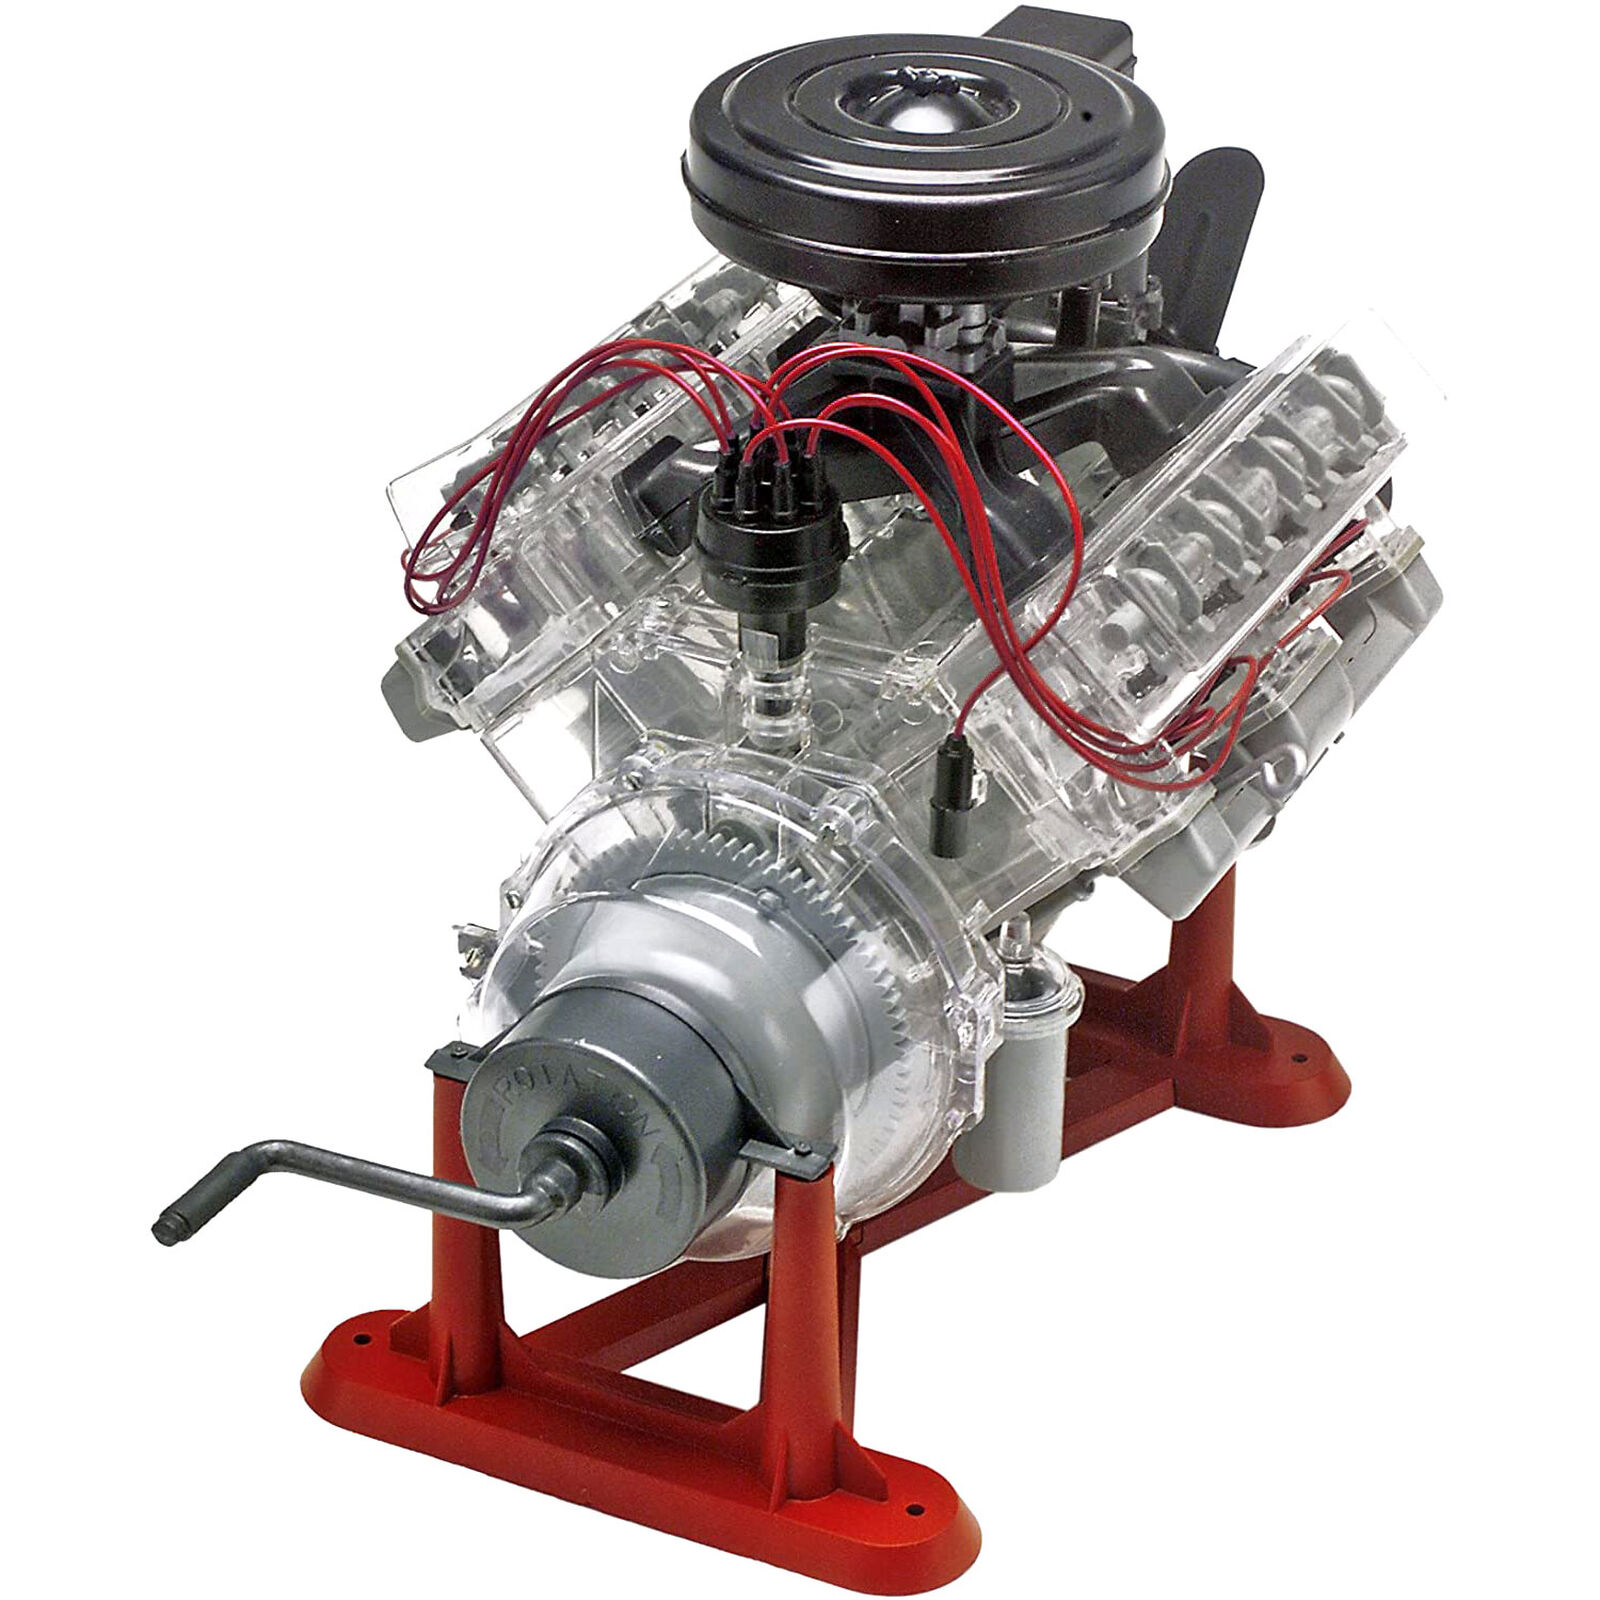 The V-8 Combustion Engine 1/4 Scale Operating Model Kit